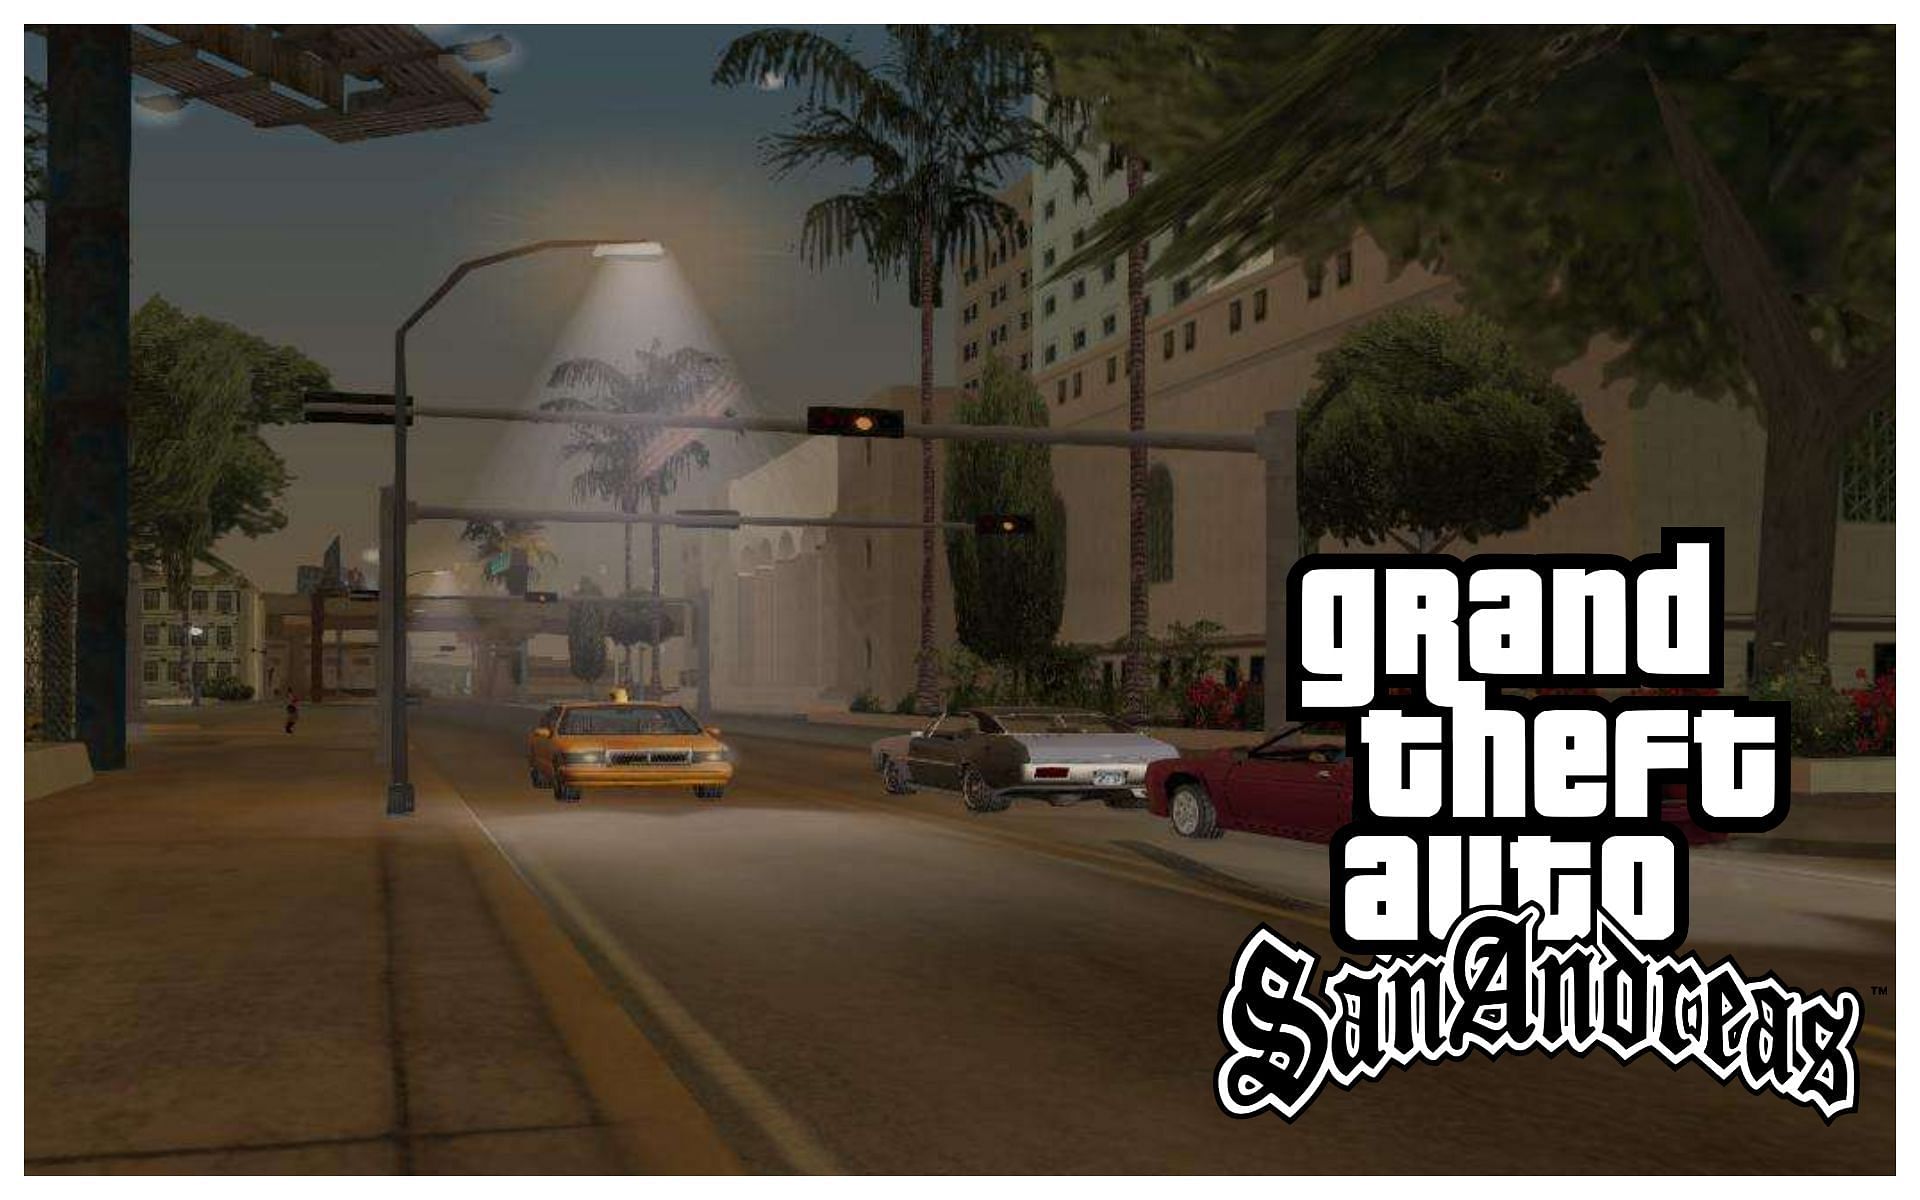 This how lights works in the game (Images via GTAaall.com)